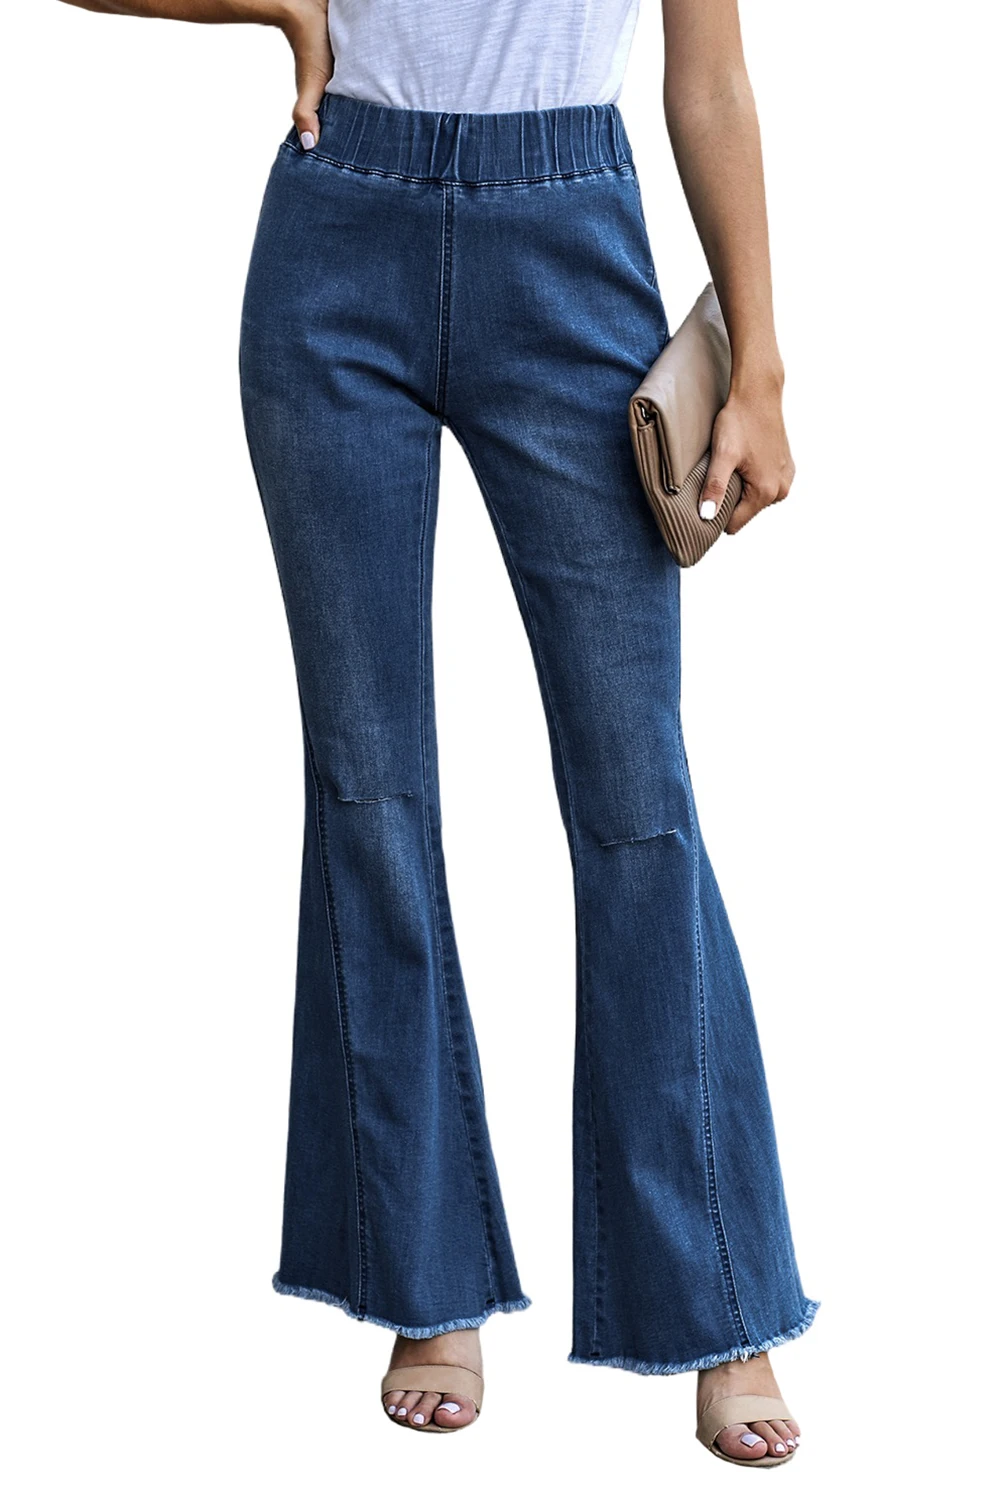 

Sky Blue Distressed Bell Bottom Hole Denim Pants Wide Leg Flared Jeans Pantalones Trendy Clothes For Women High Waist Trousers